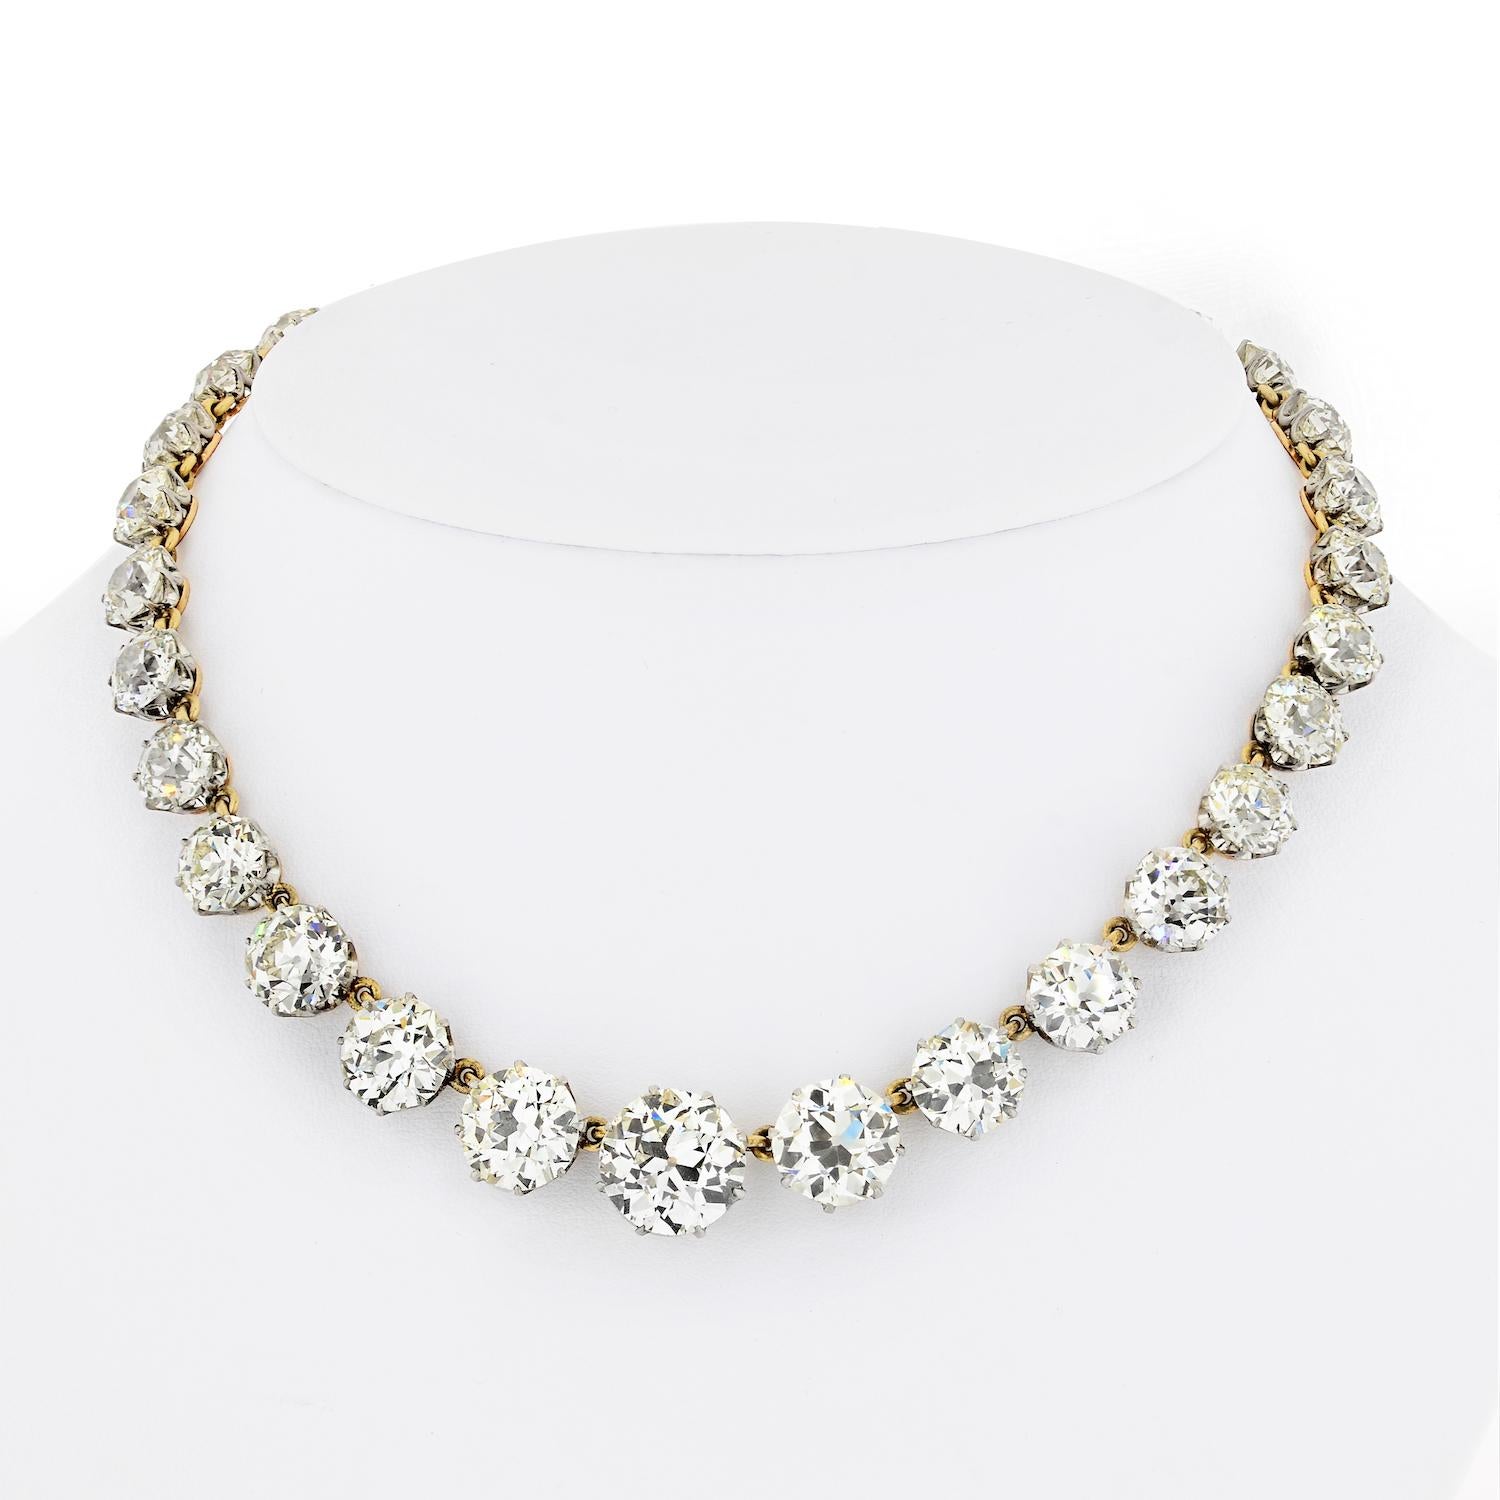 The vintage rivière necklace is crafted from a 18-karat gold. It's strung with thirty-two Old European-cut diamonds that shimmer in the light. 

Wear yours for your next event for a beautiful finishing touch.
Necklace length: 15 inches. 
Total carat